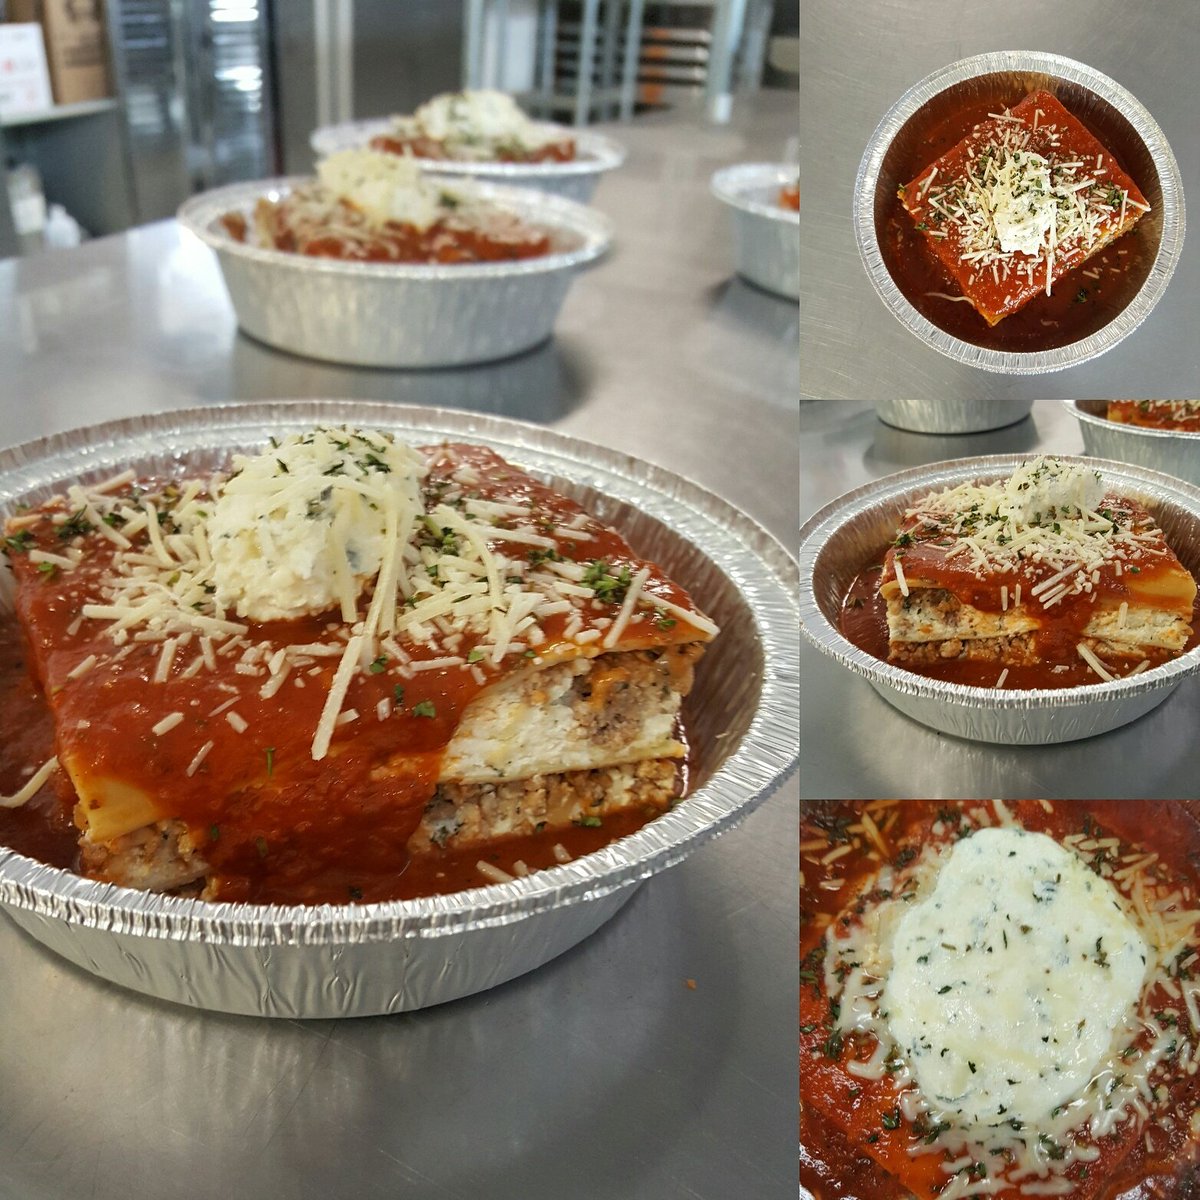 #beef #lasagna available this week for #dinner drop offs and always available for #catering. #whatsfordinner #farmsteadfoods #phillyfood